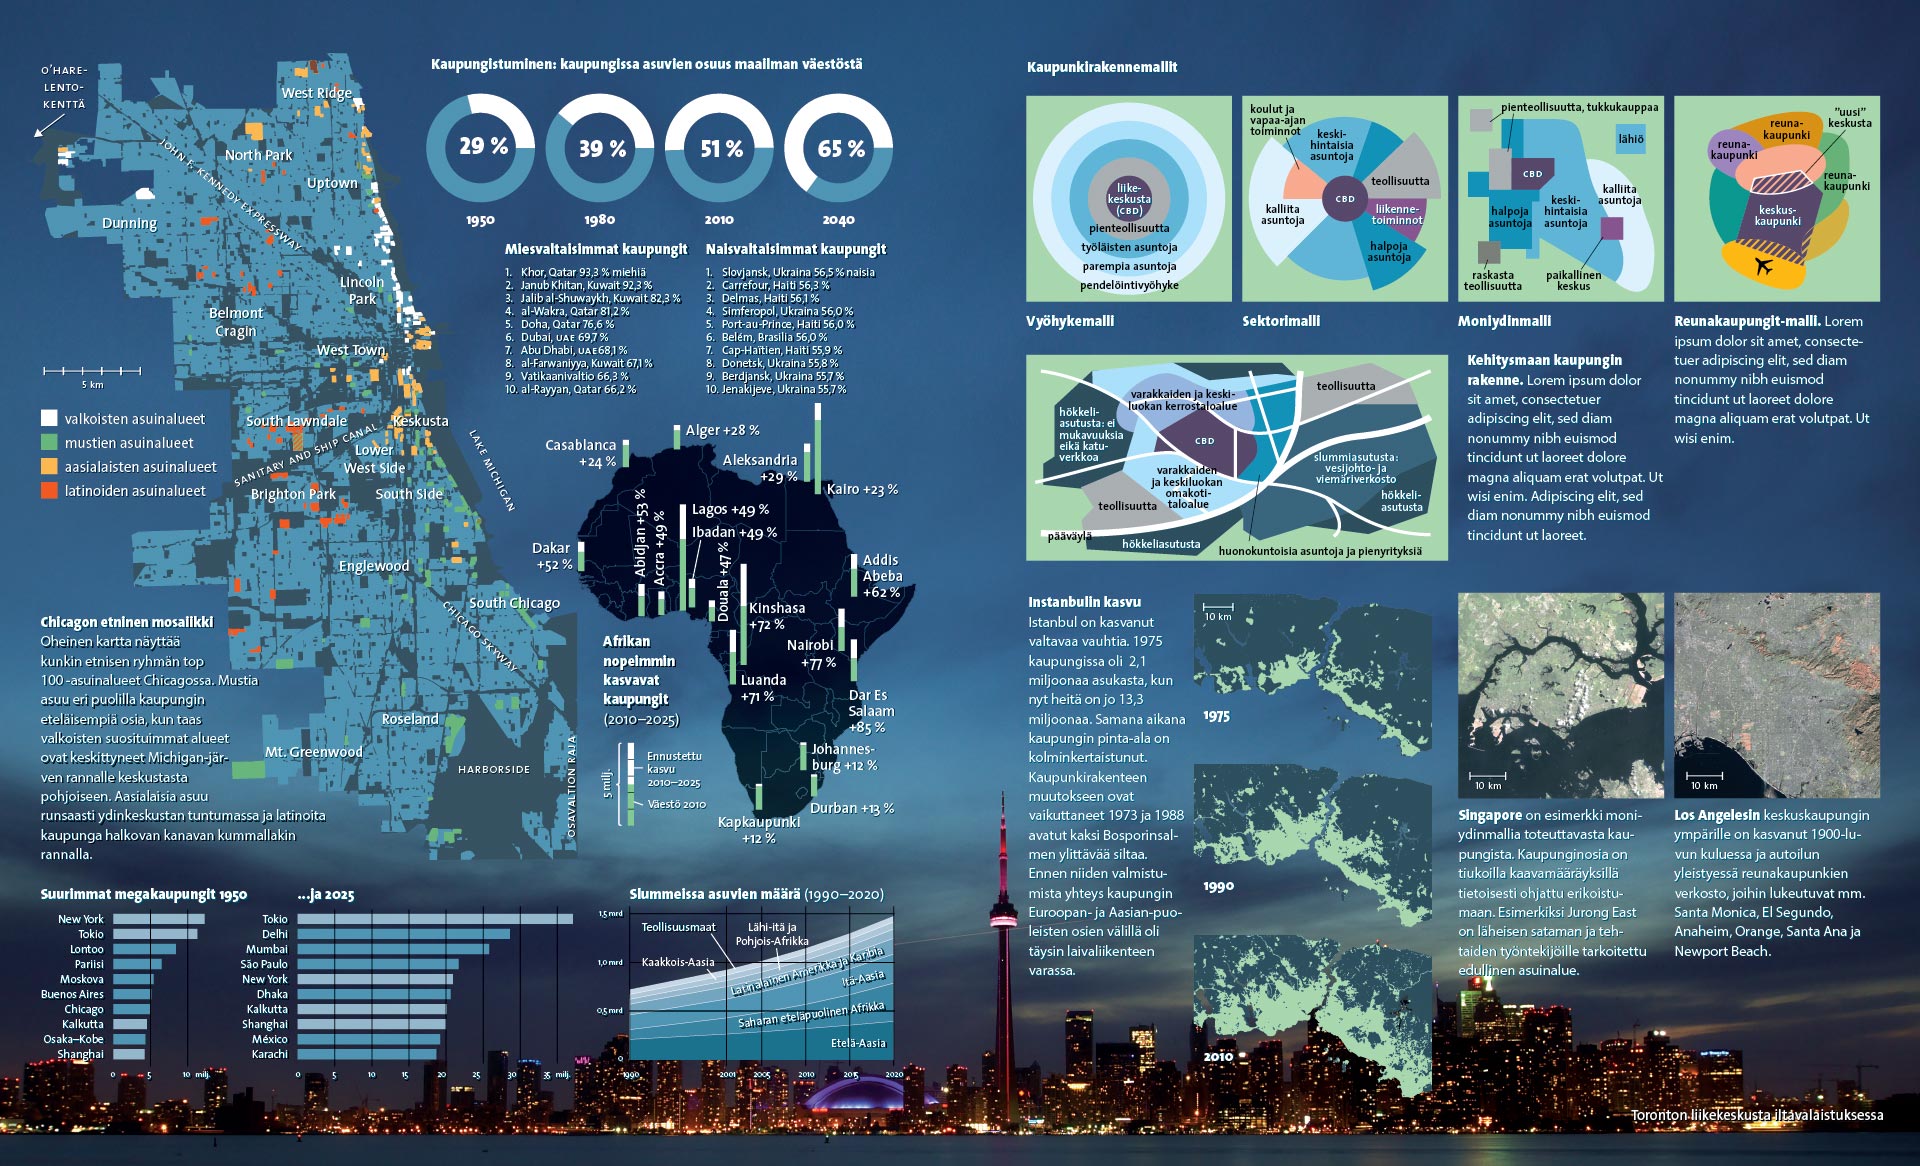 Spread with infographics depicting various facts on urban structures around the world.